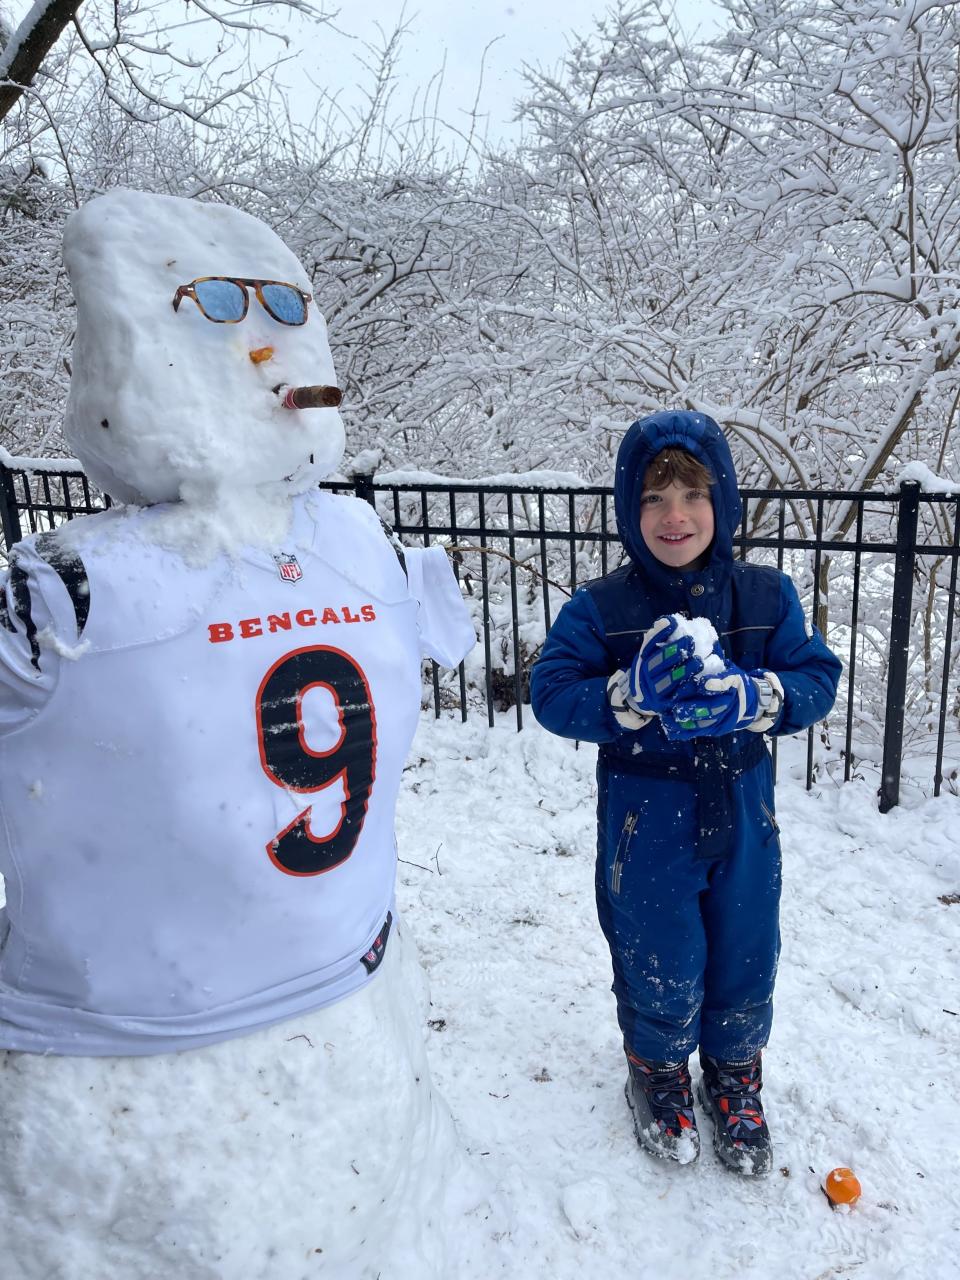 Carter Haas, 5, of Mount Lookout built stands with “Snow Burrow” outside his Mount Lookout home Sunday. His father Laurence Haas said the snow is perfect for building “Snow Burrows” all over the city.